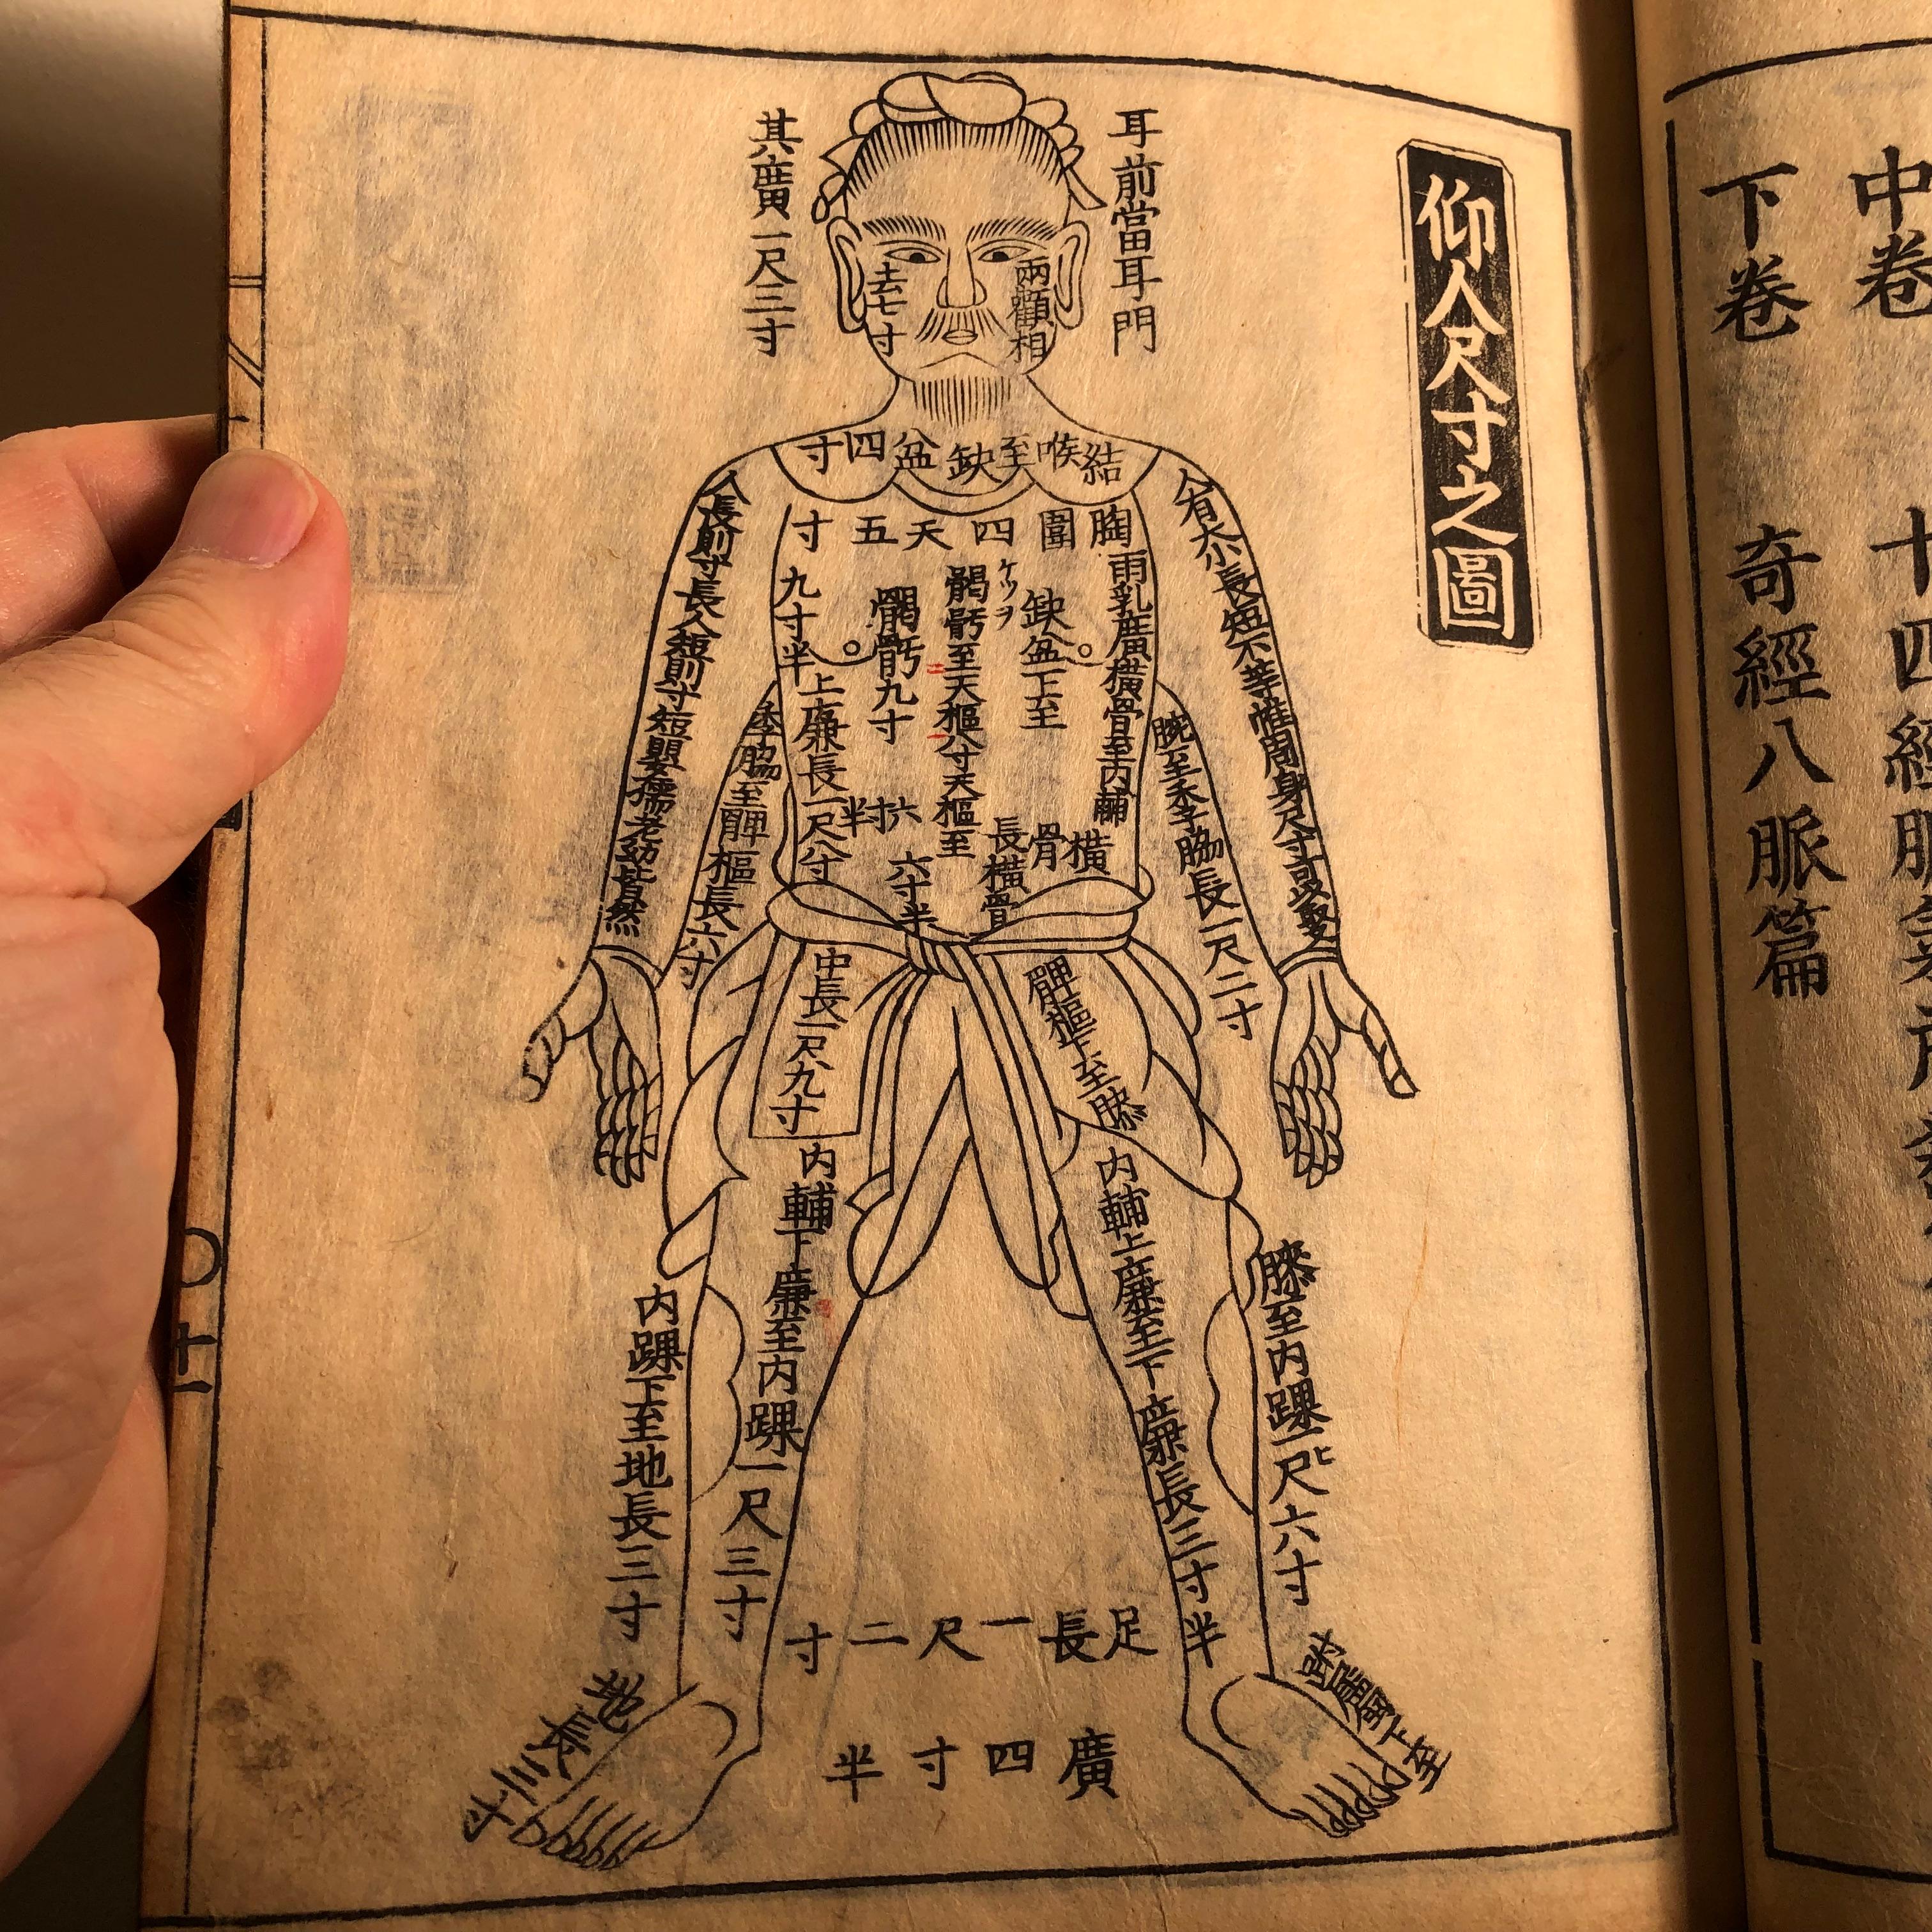 Important Japanese complete antique signed and well illustrated woodblock print book entitled: Chinese Acupuncture and 
Moxibustion- the art of Chinese acupuncture and heat therapy 

Title: Shinkan jushikeiraku hakki (jo, chu, ge in one